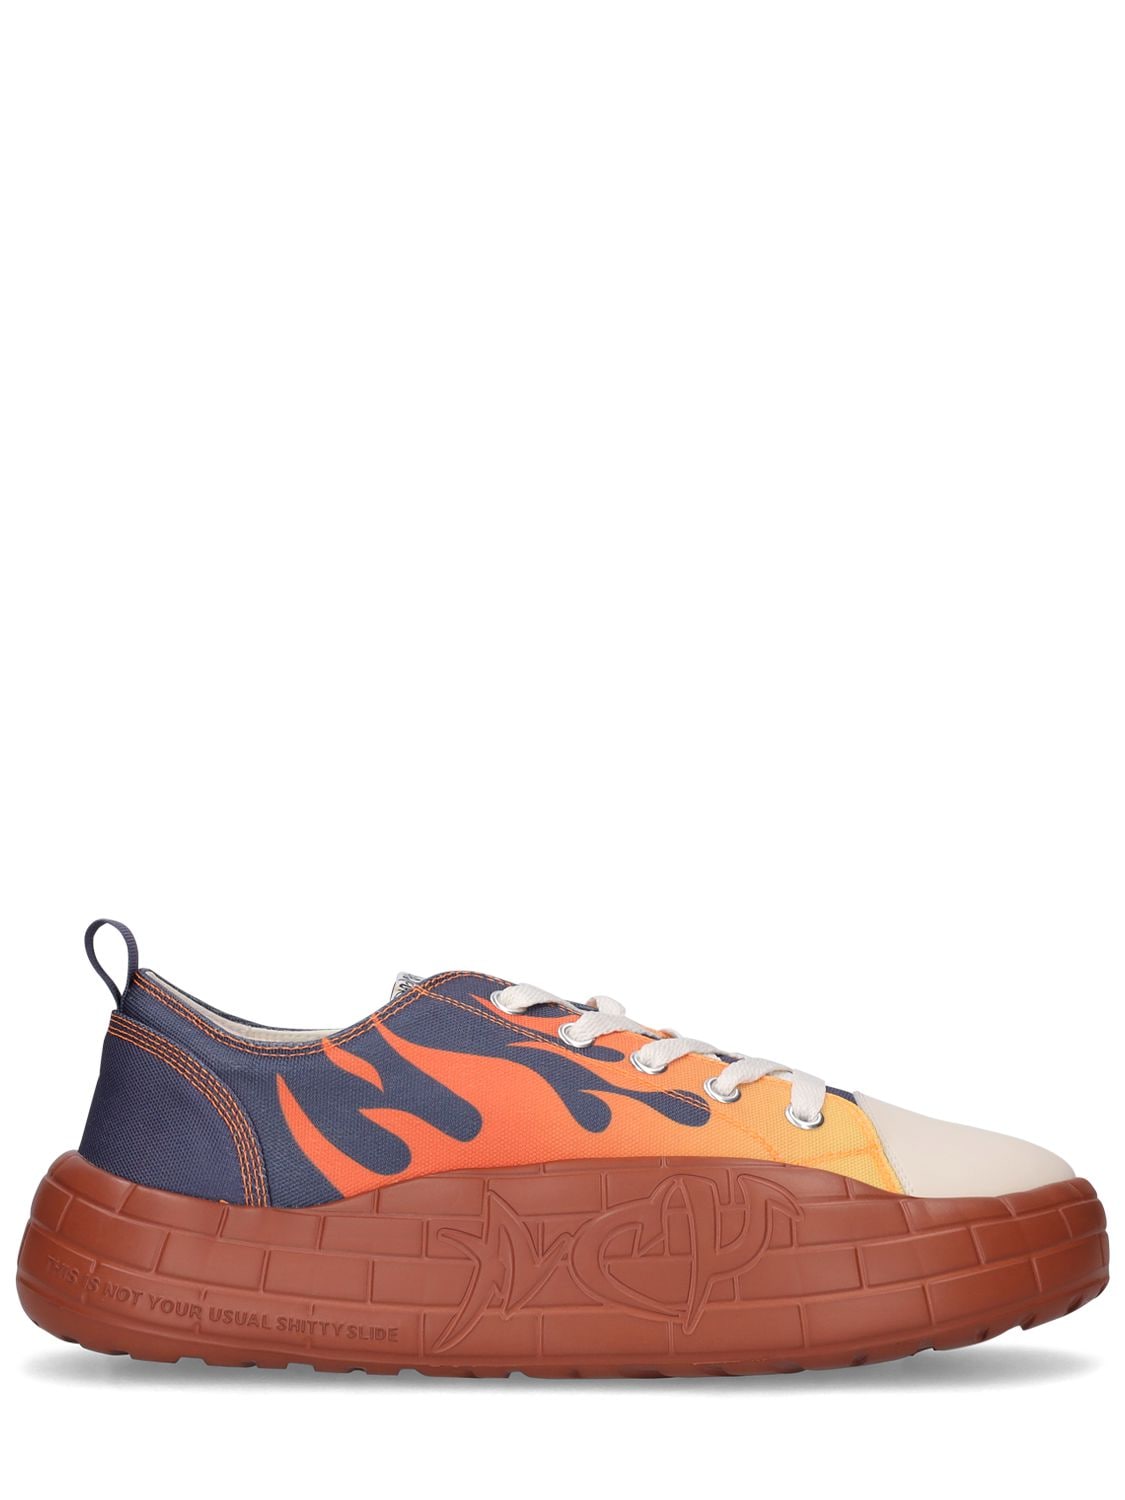 ACUPUNCTURE Nyu Vulc Flame Canvas Sneakers